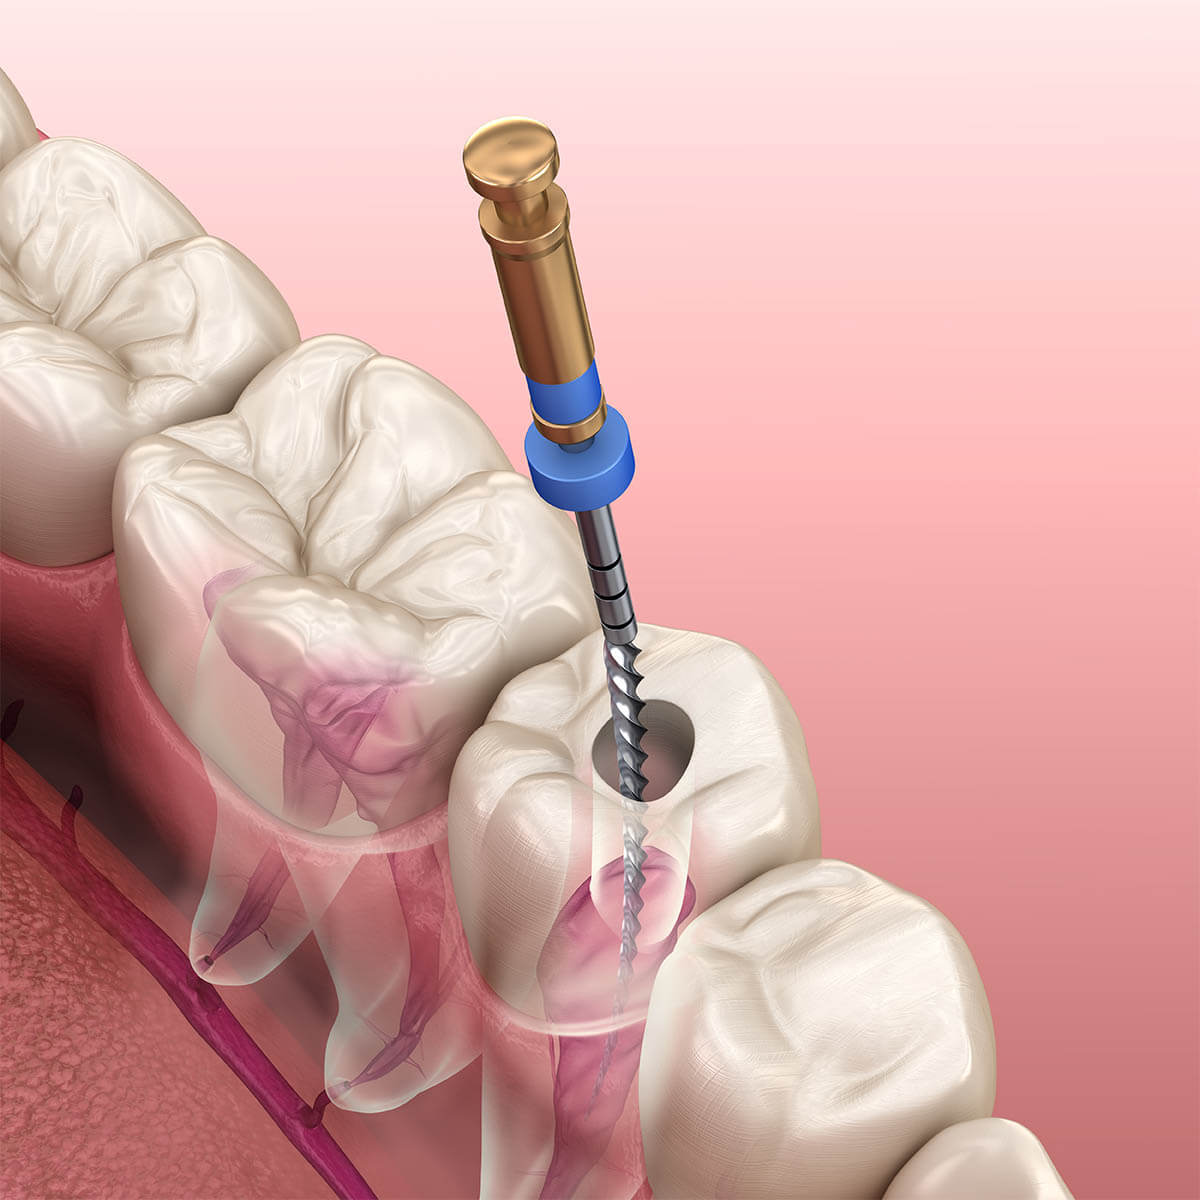 Root Canal Infection in San Antonio TX Area